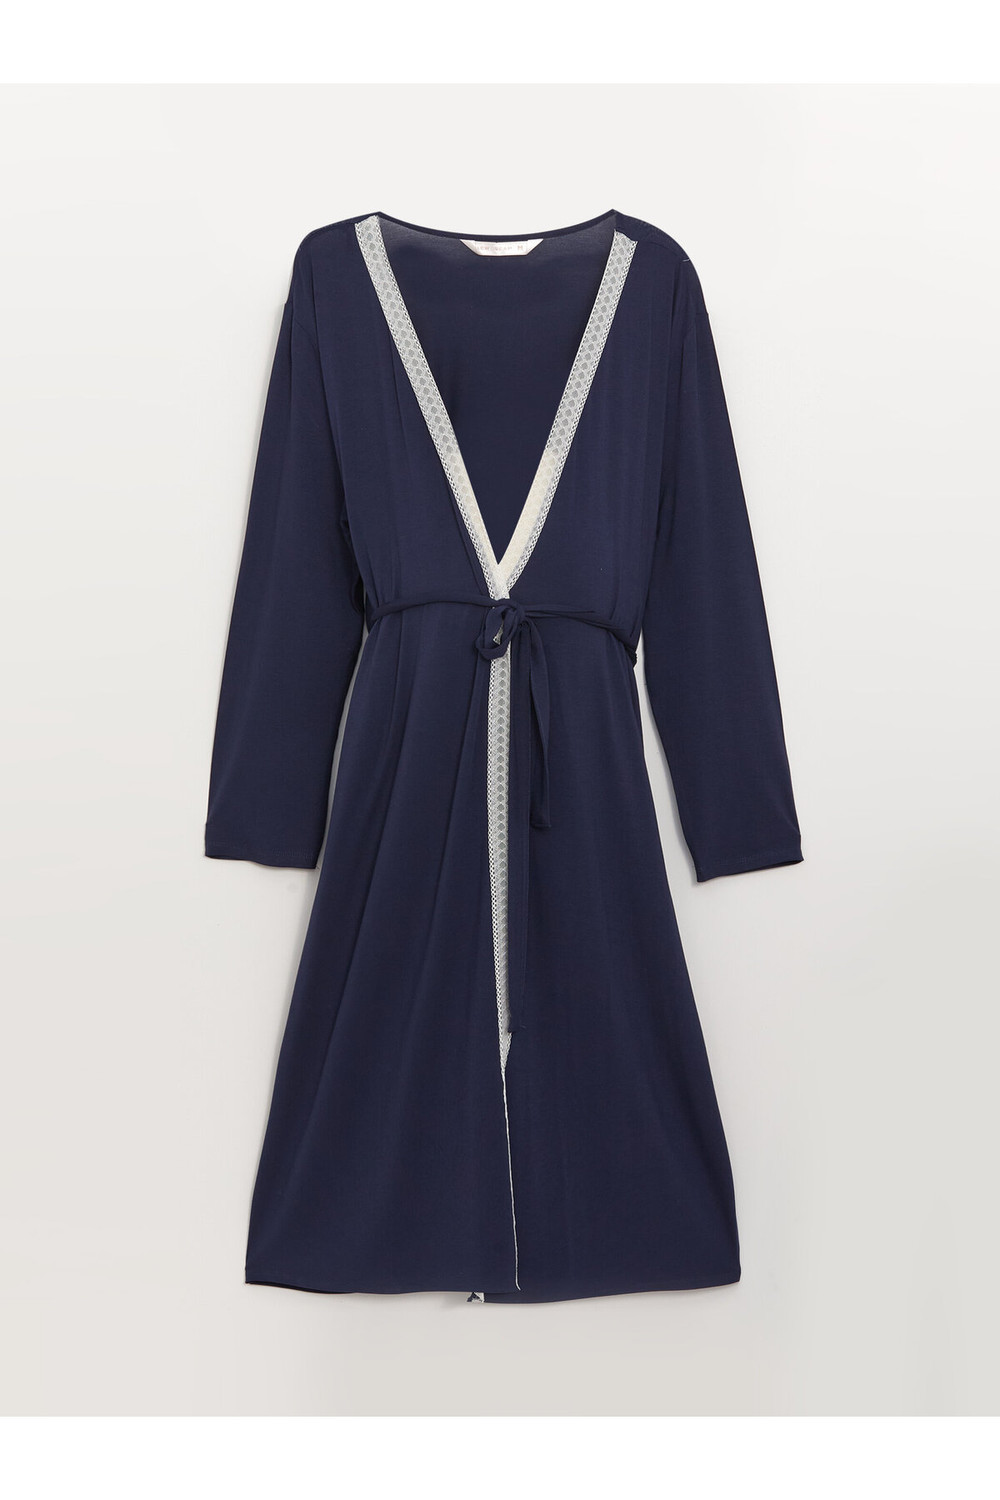 LC Waikiki Long Sleeve Maternity Dressing Gown with Shawl Collar Plain